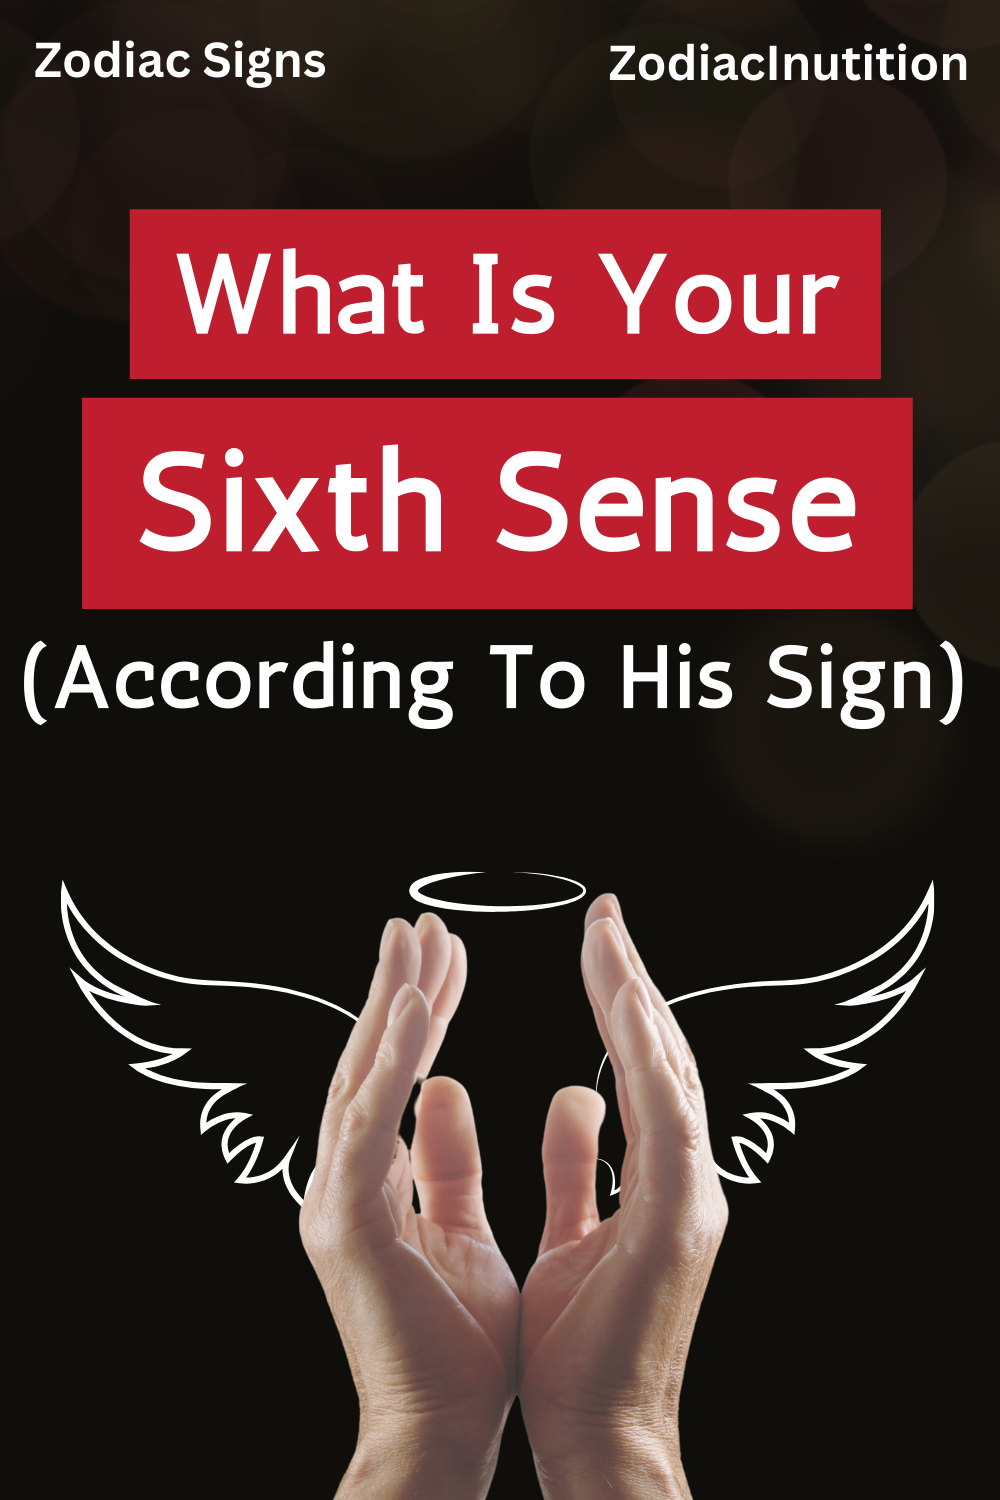 What Is Your Sixth Sense According To Your Sign?